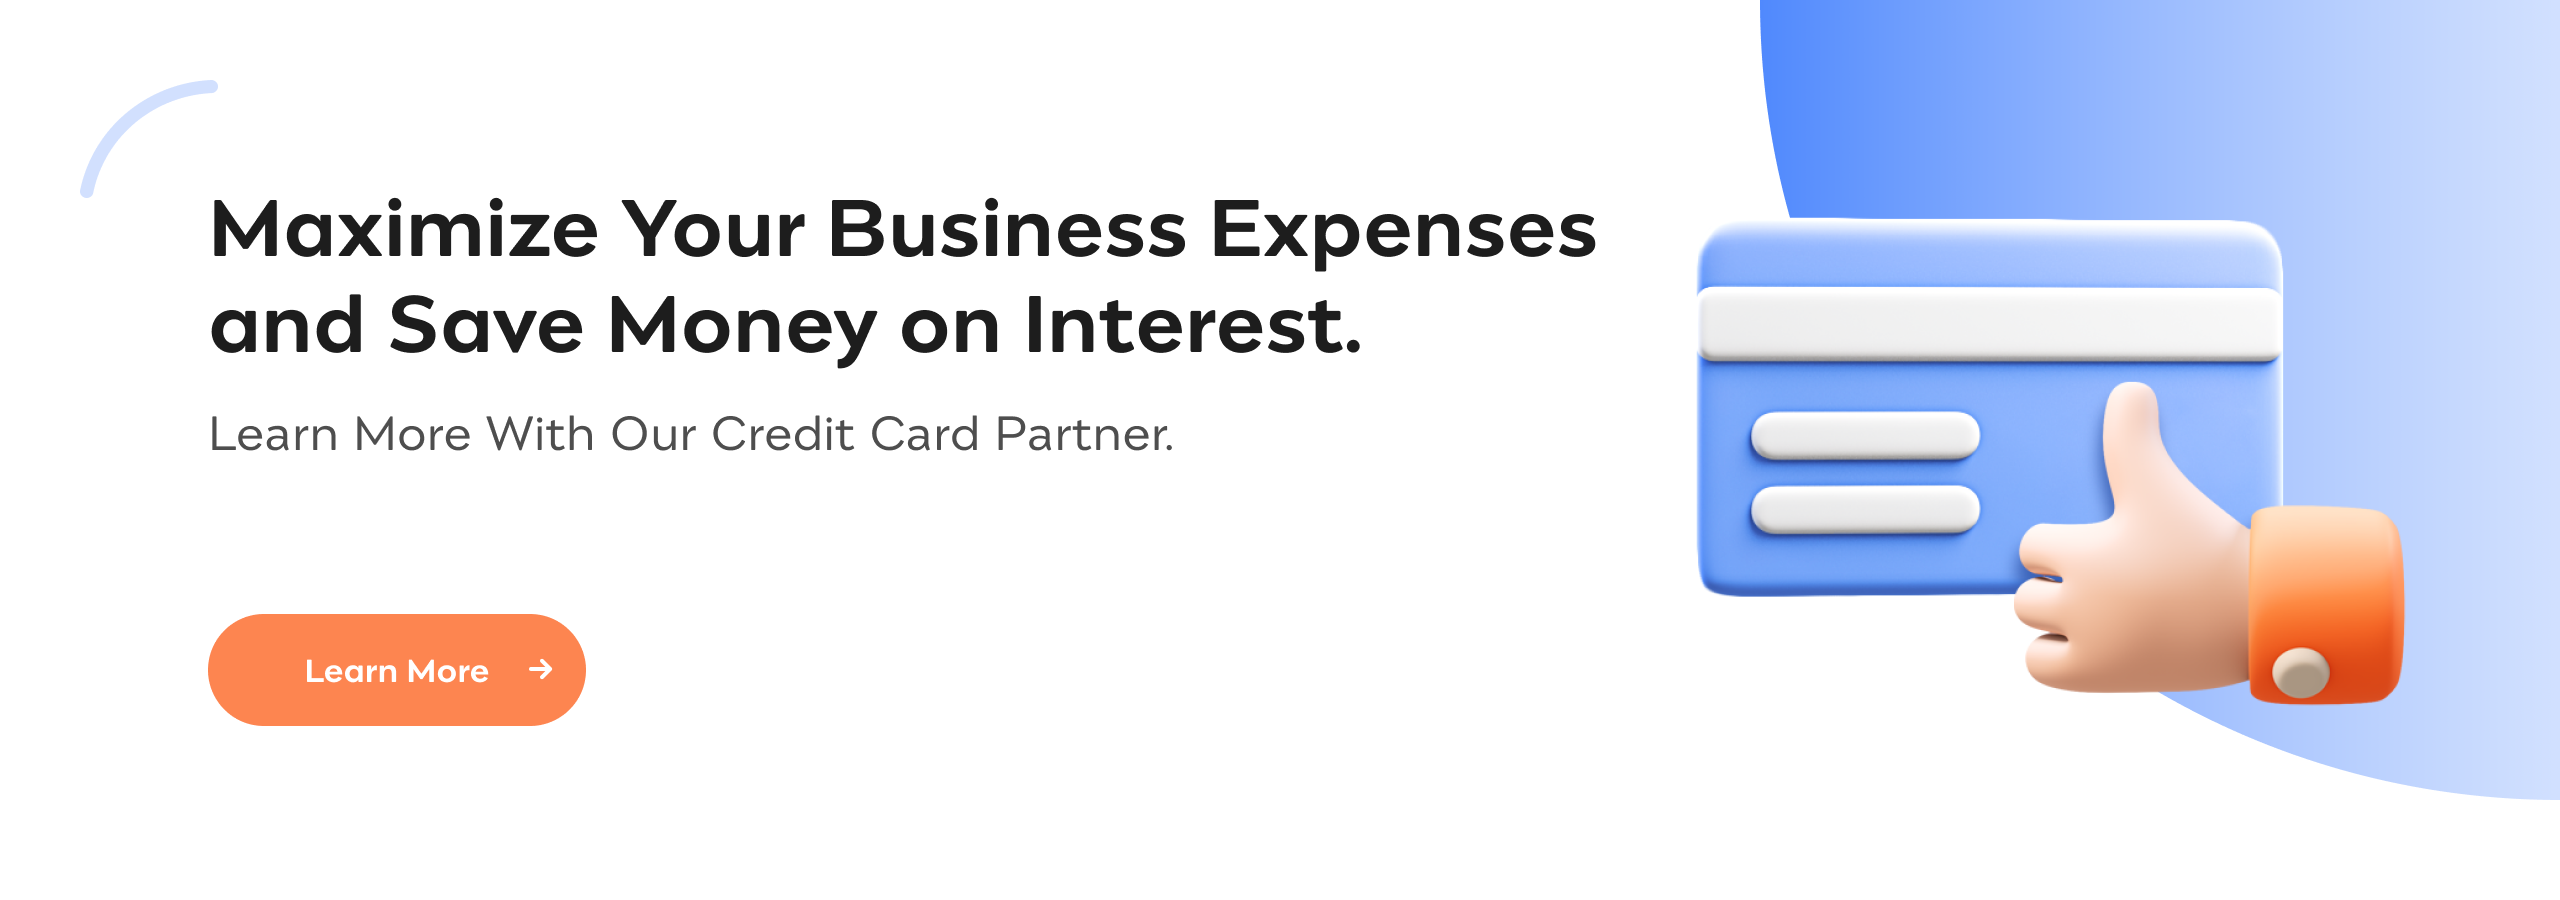 Maximize Your Business Expenses and Save Money on Interest. Learn More with Our Credit Card Partner.